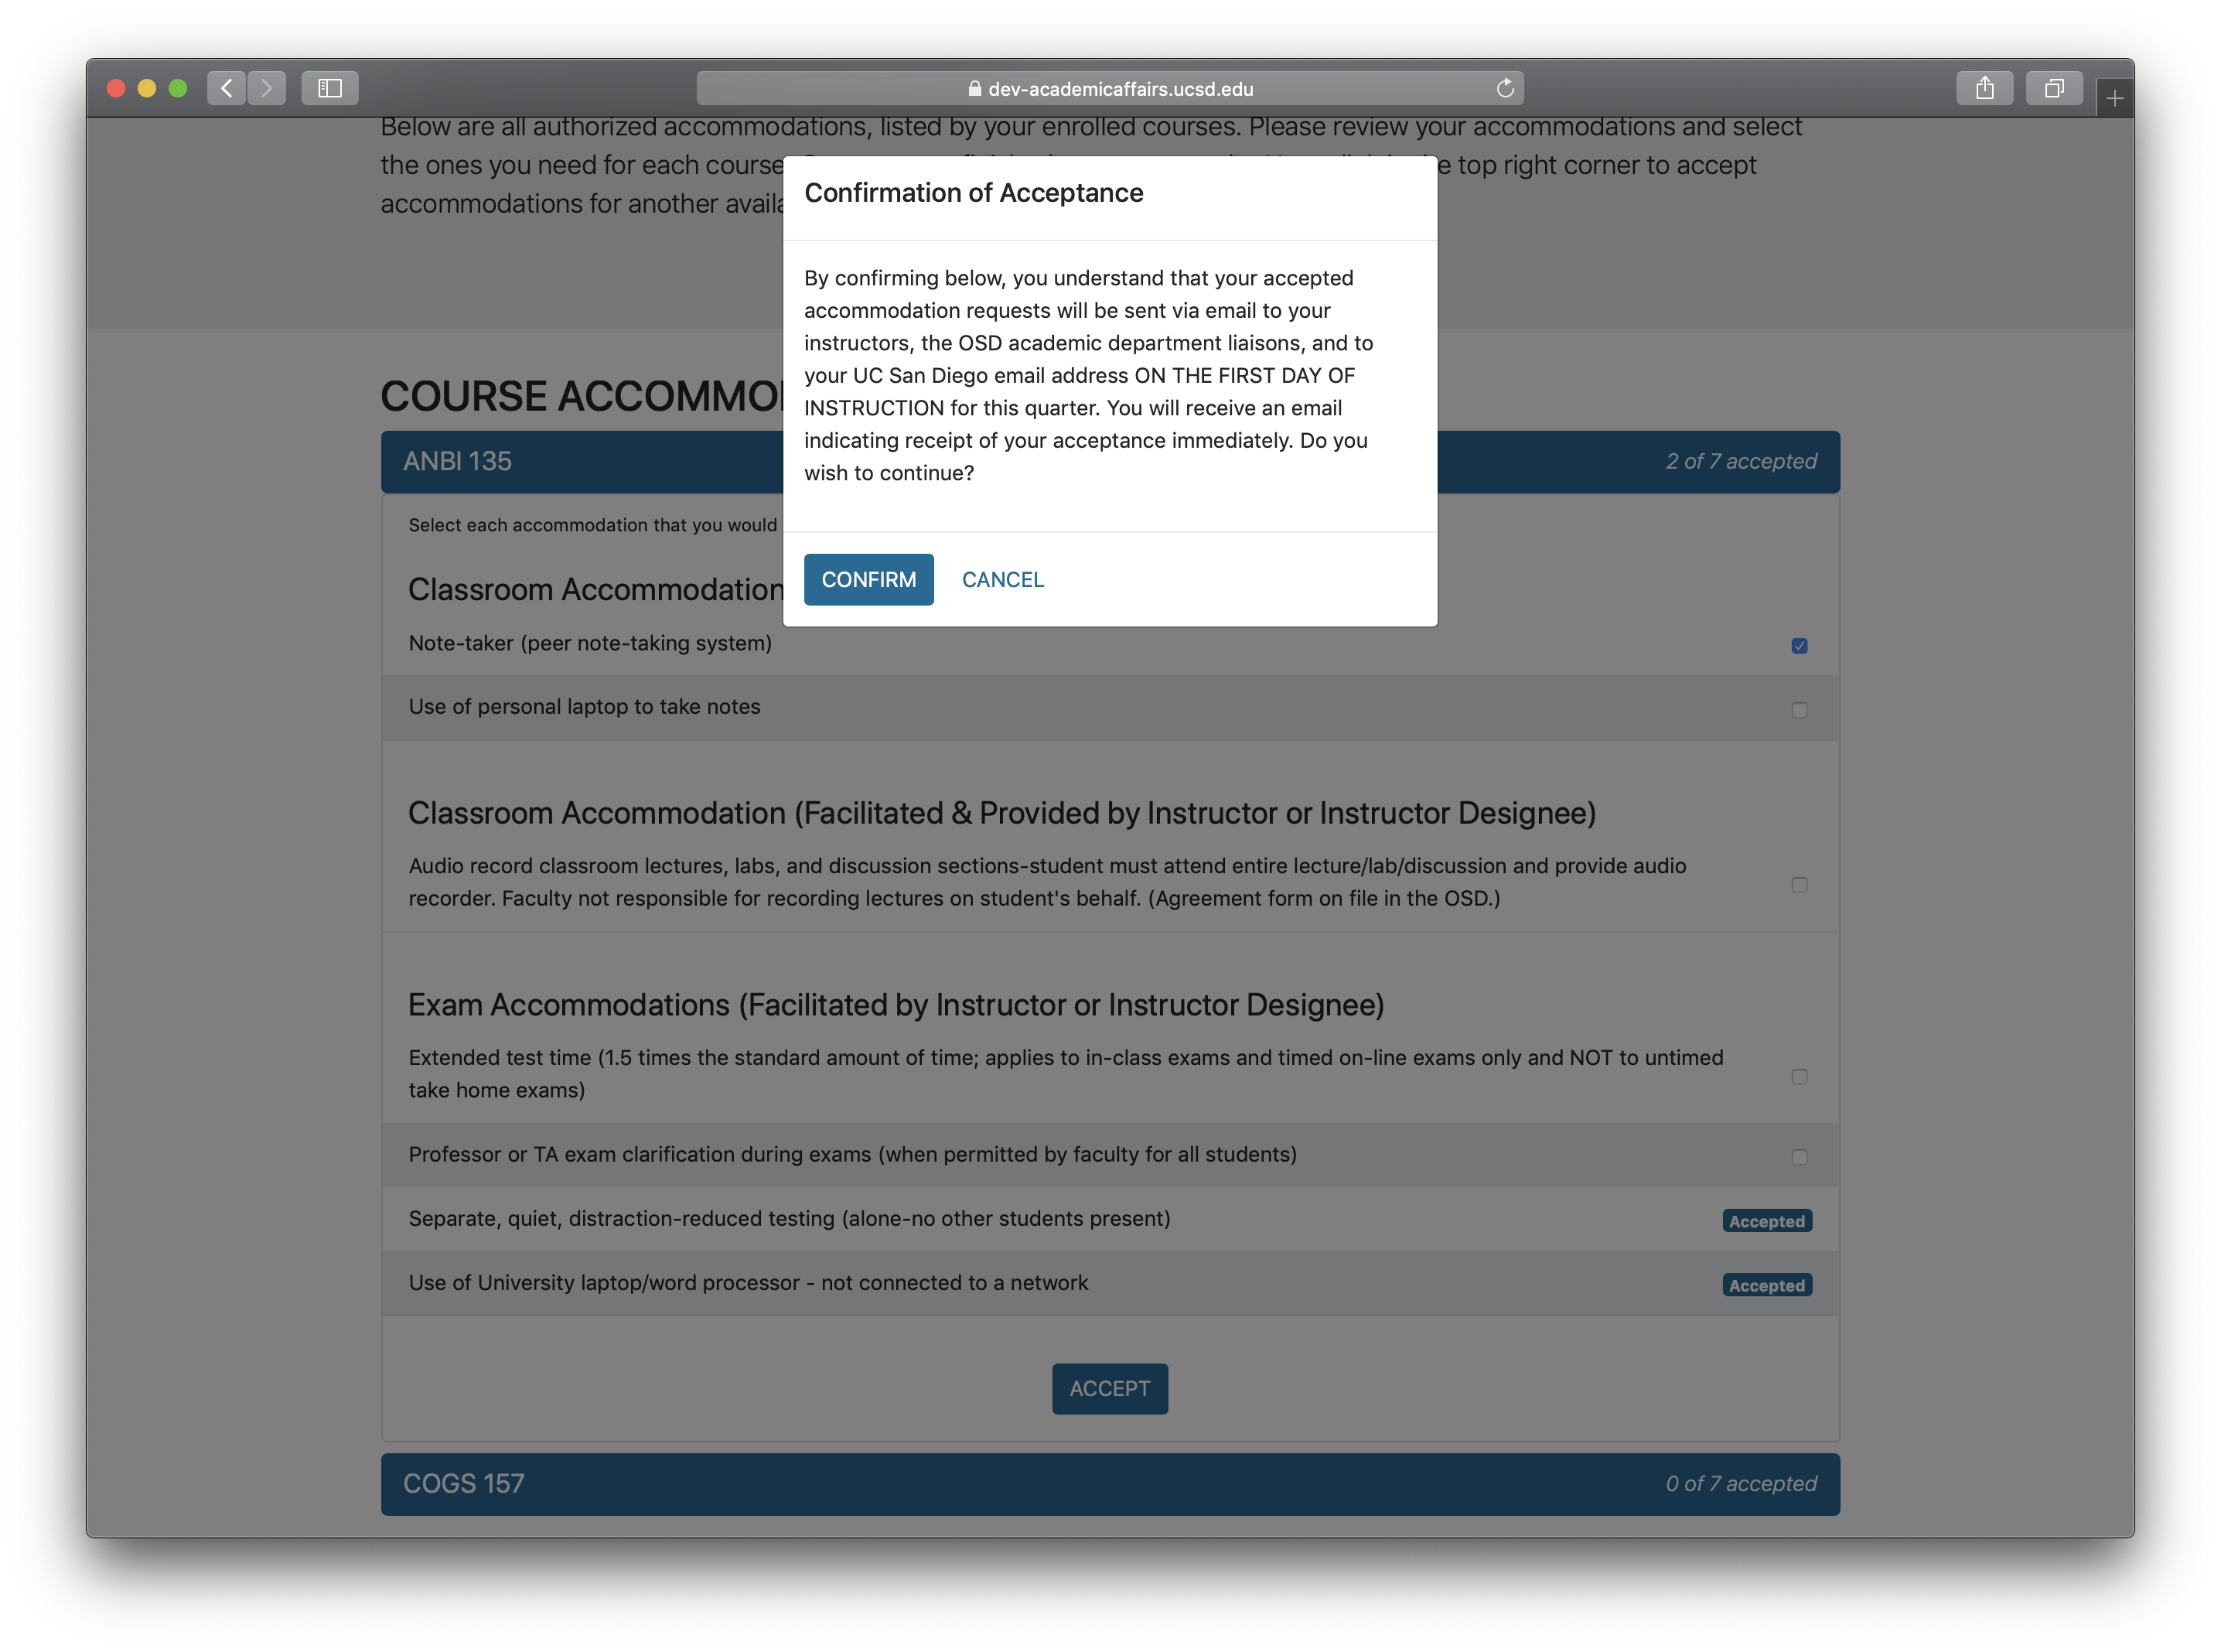 Screenshot of the dialogue box for confirming accommodations before the first day of instruction.